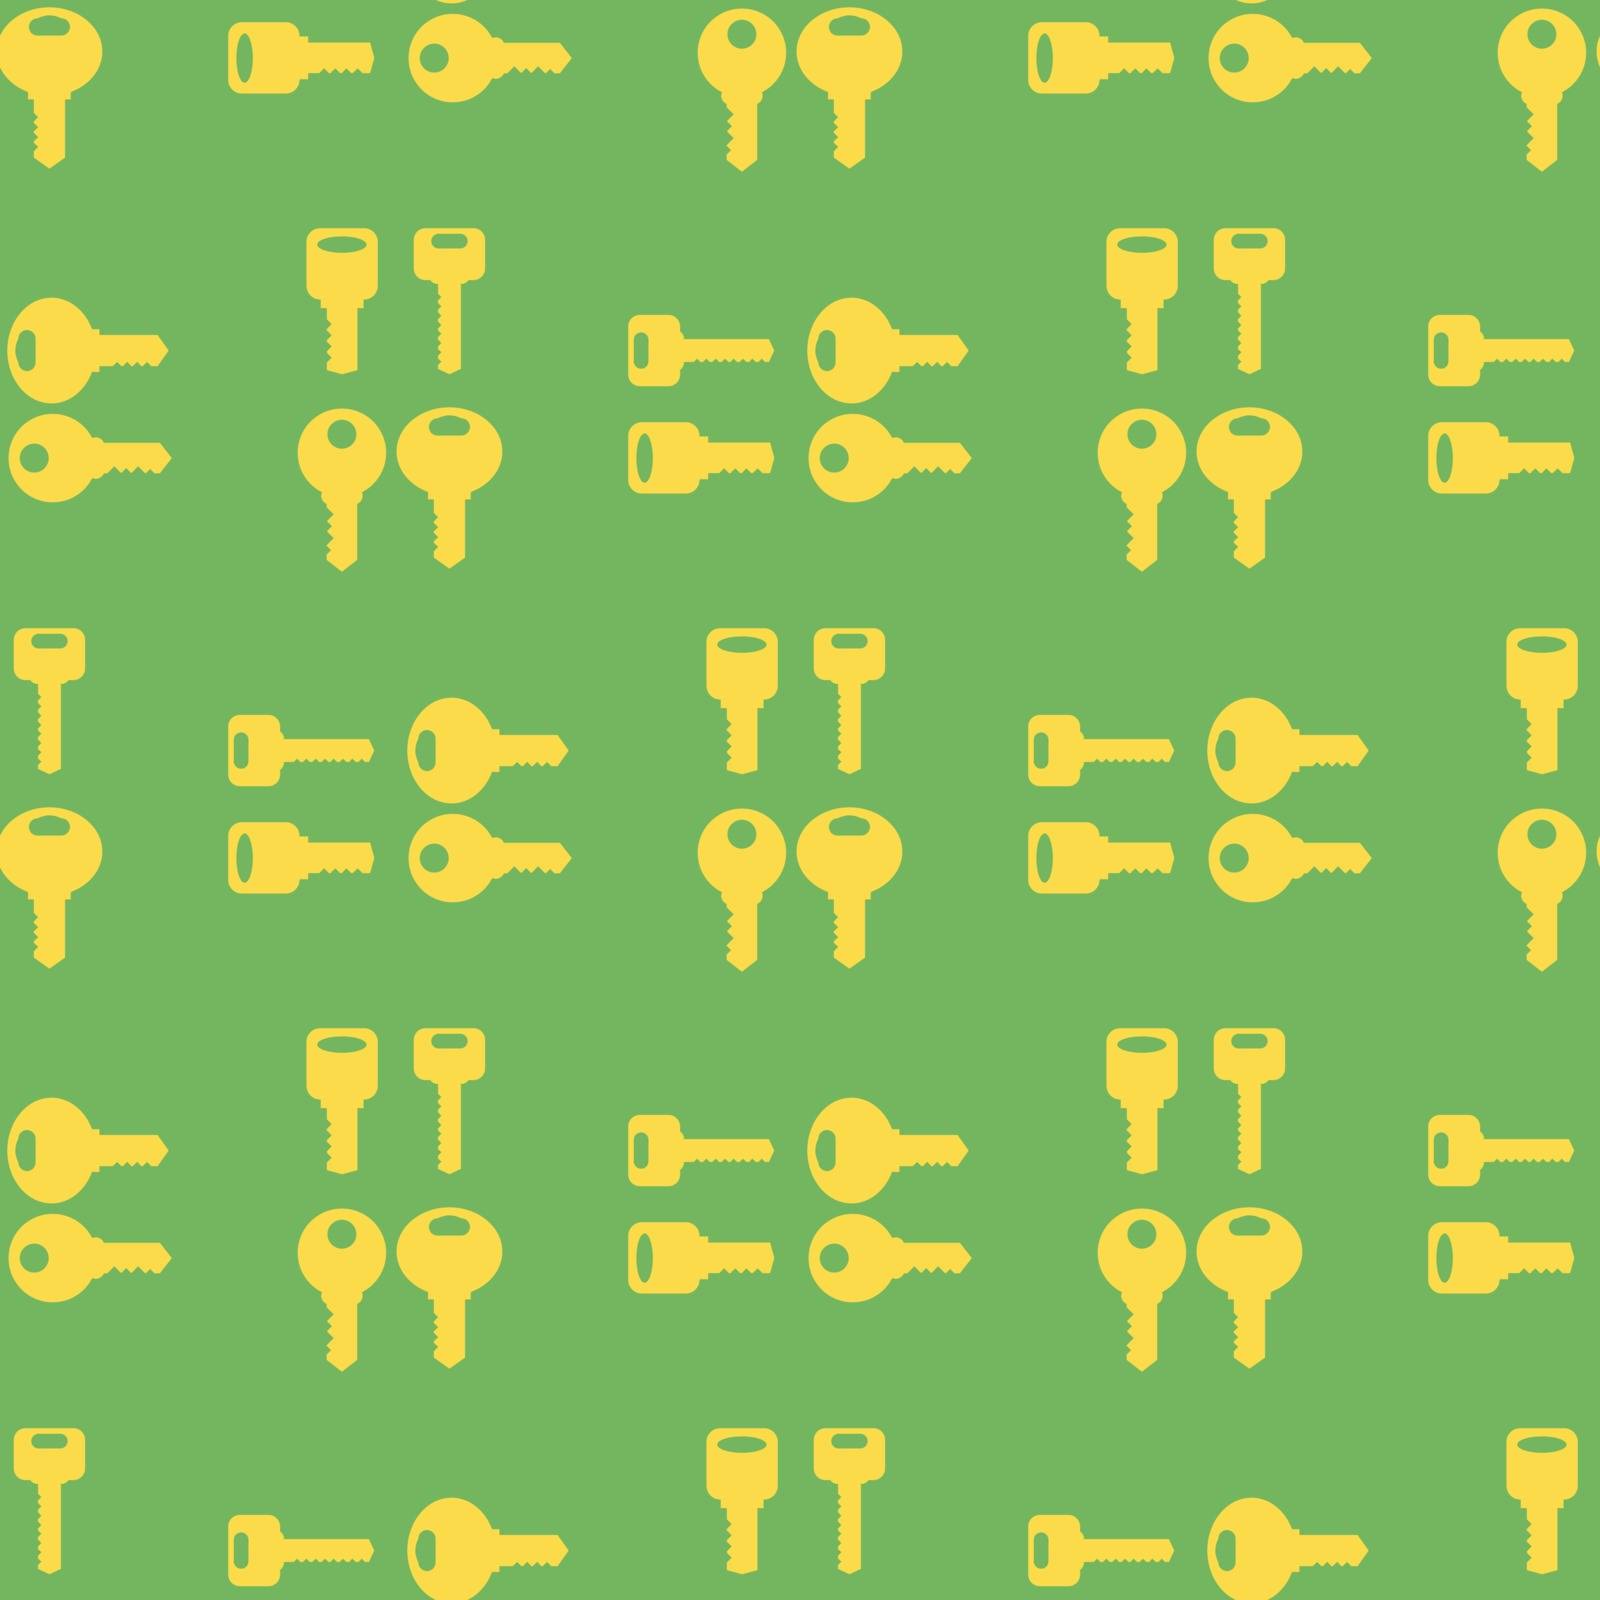 Yellow Keys Isolated on Green Background. Seamless Gold Key Pattern